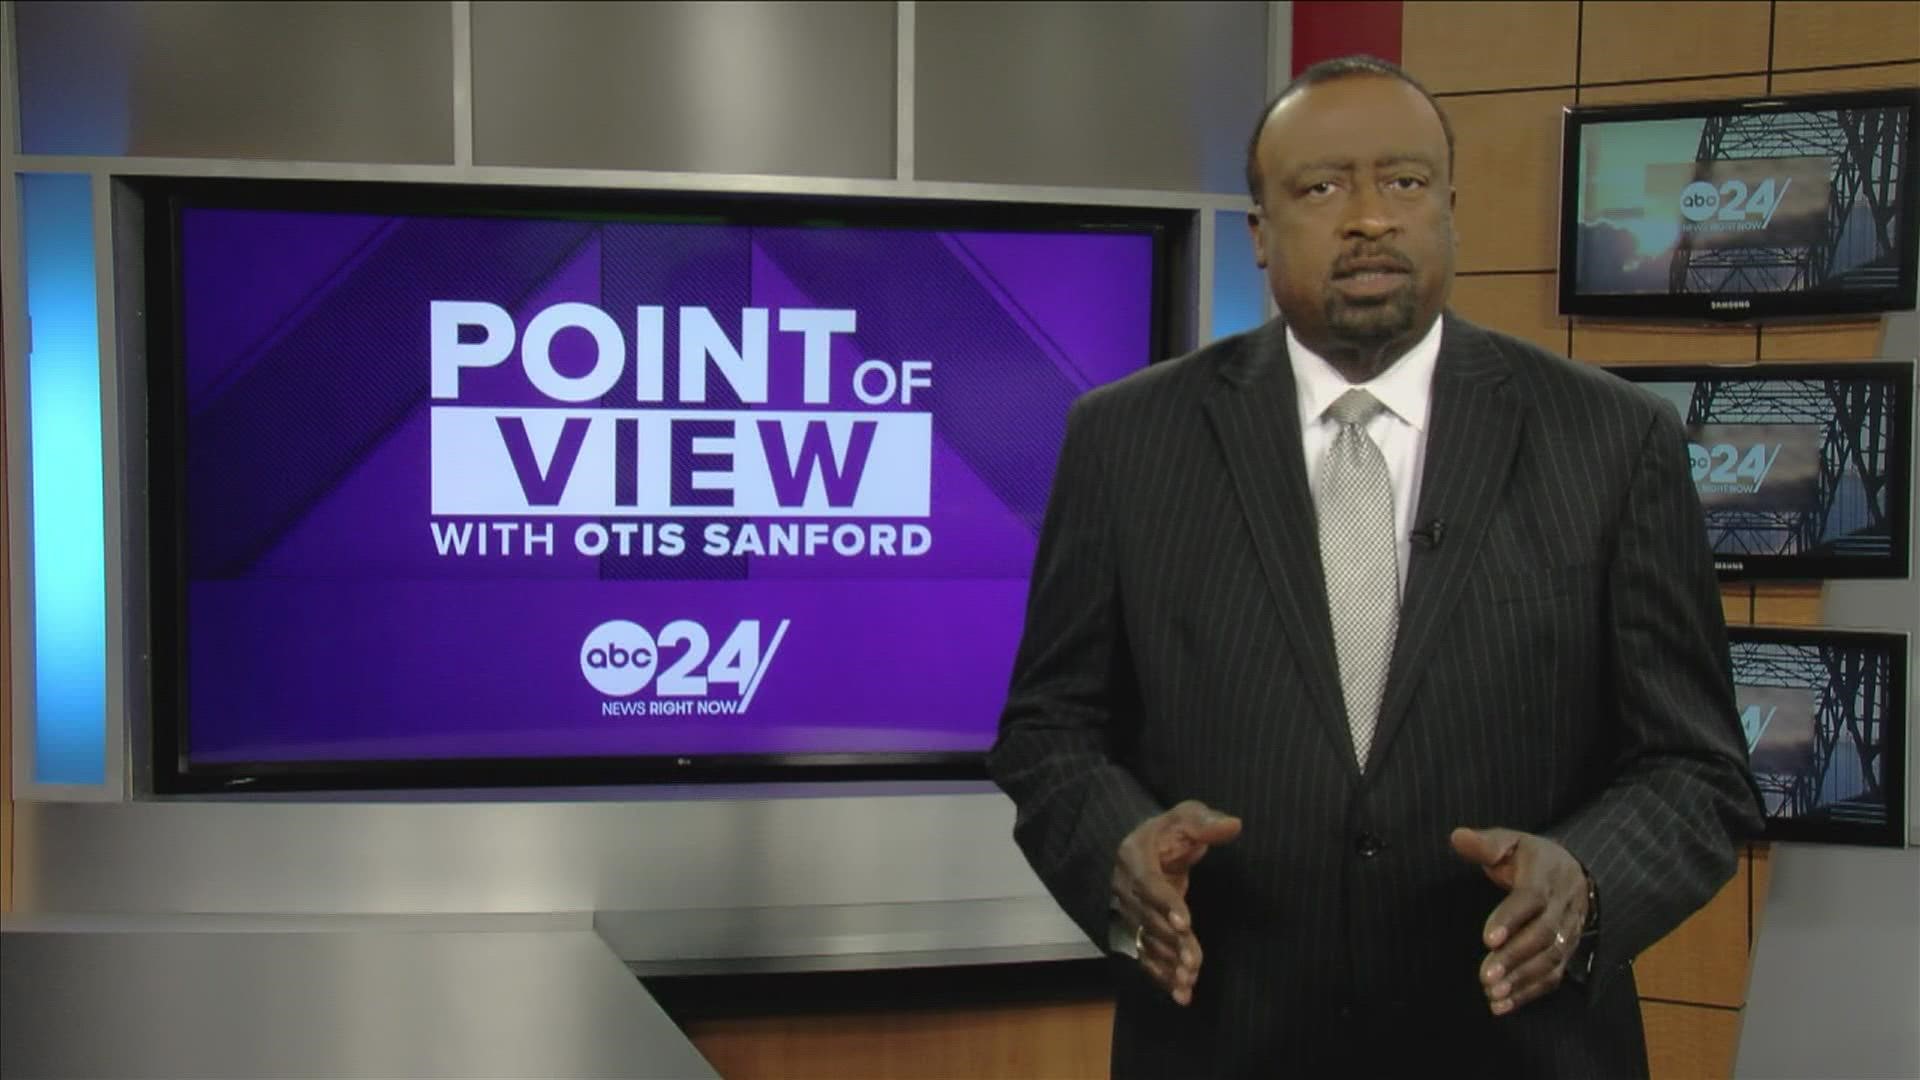 ABC24 political analyst and commentator Otis Sanford shared his point of view on the big stories from Tuesday’s elections in Shelby County.